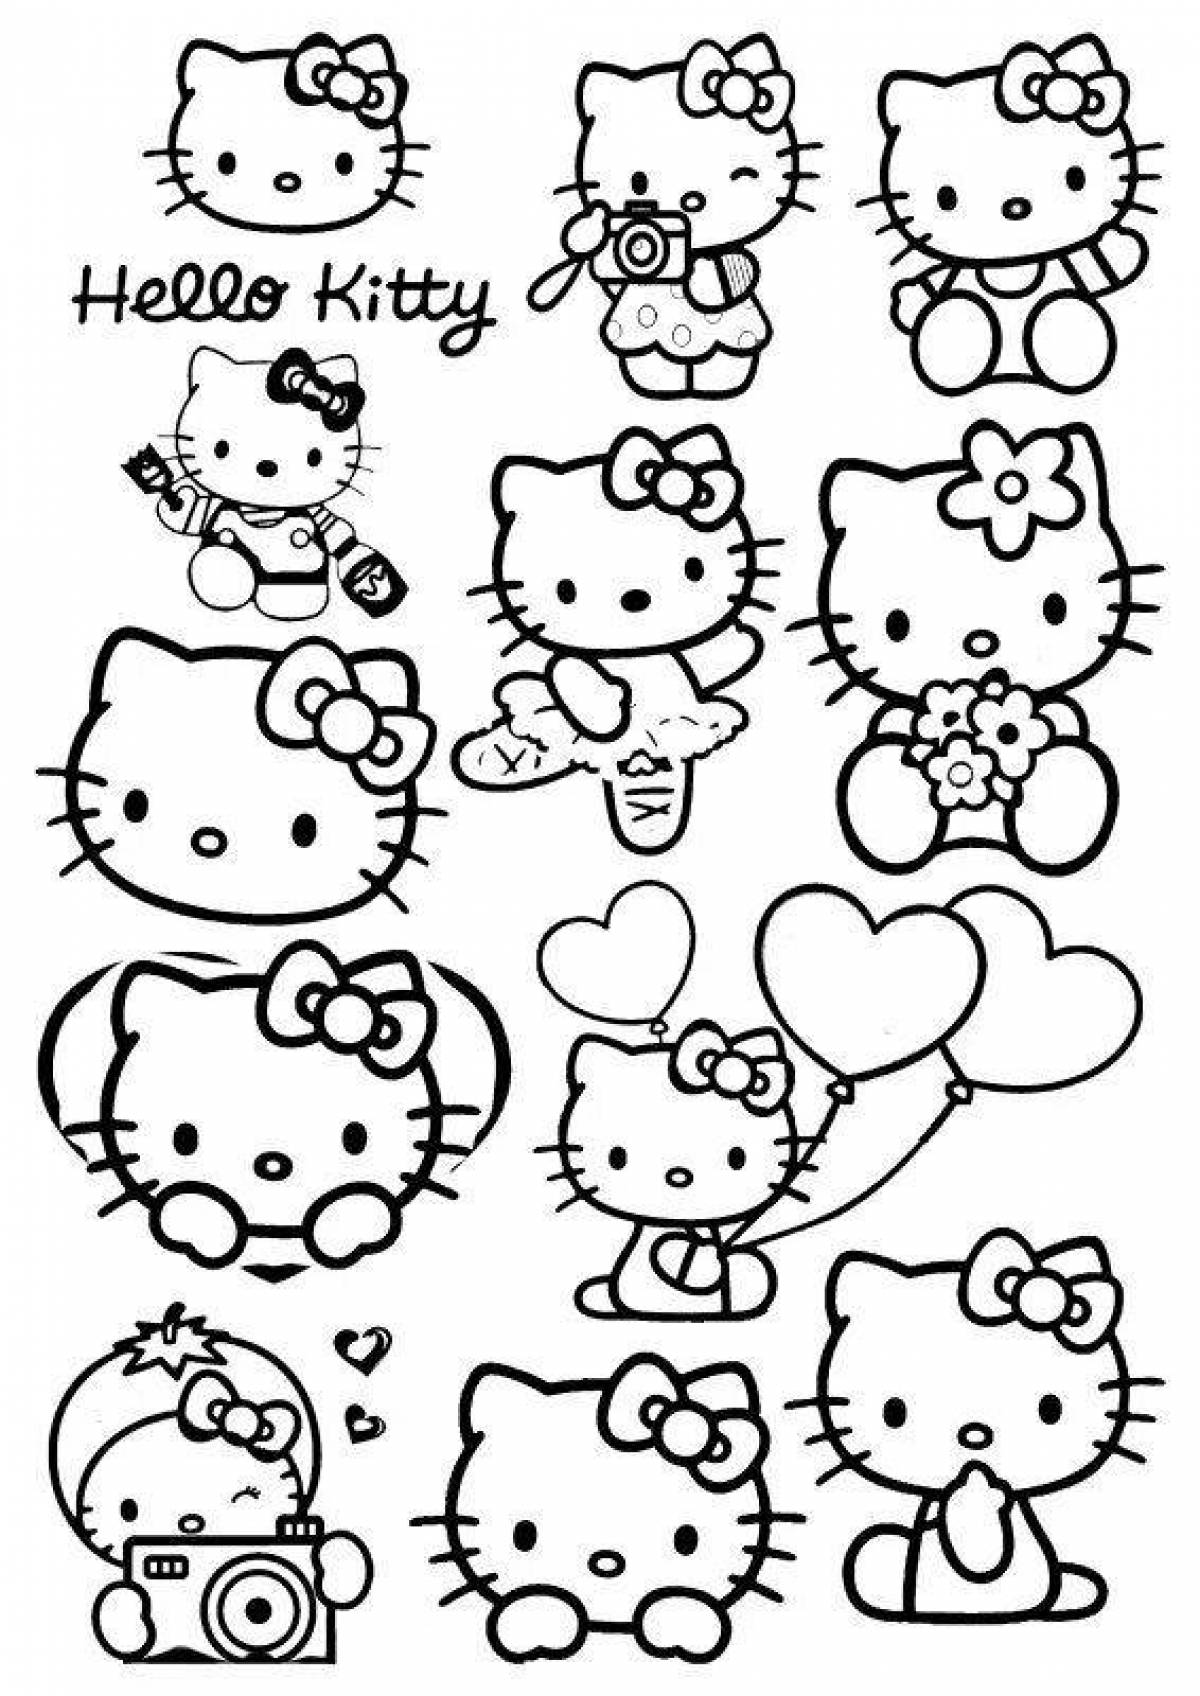 Dazzling hello kitty coloring book